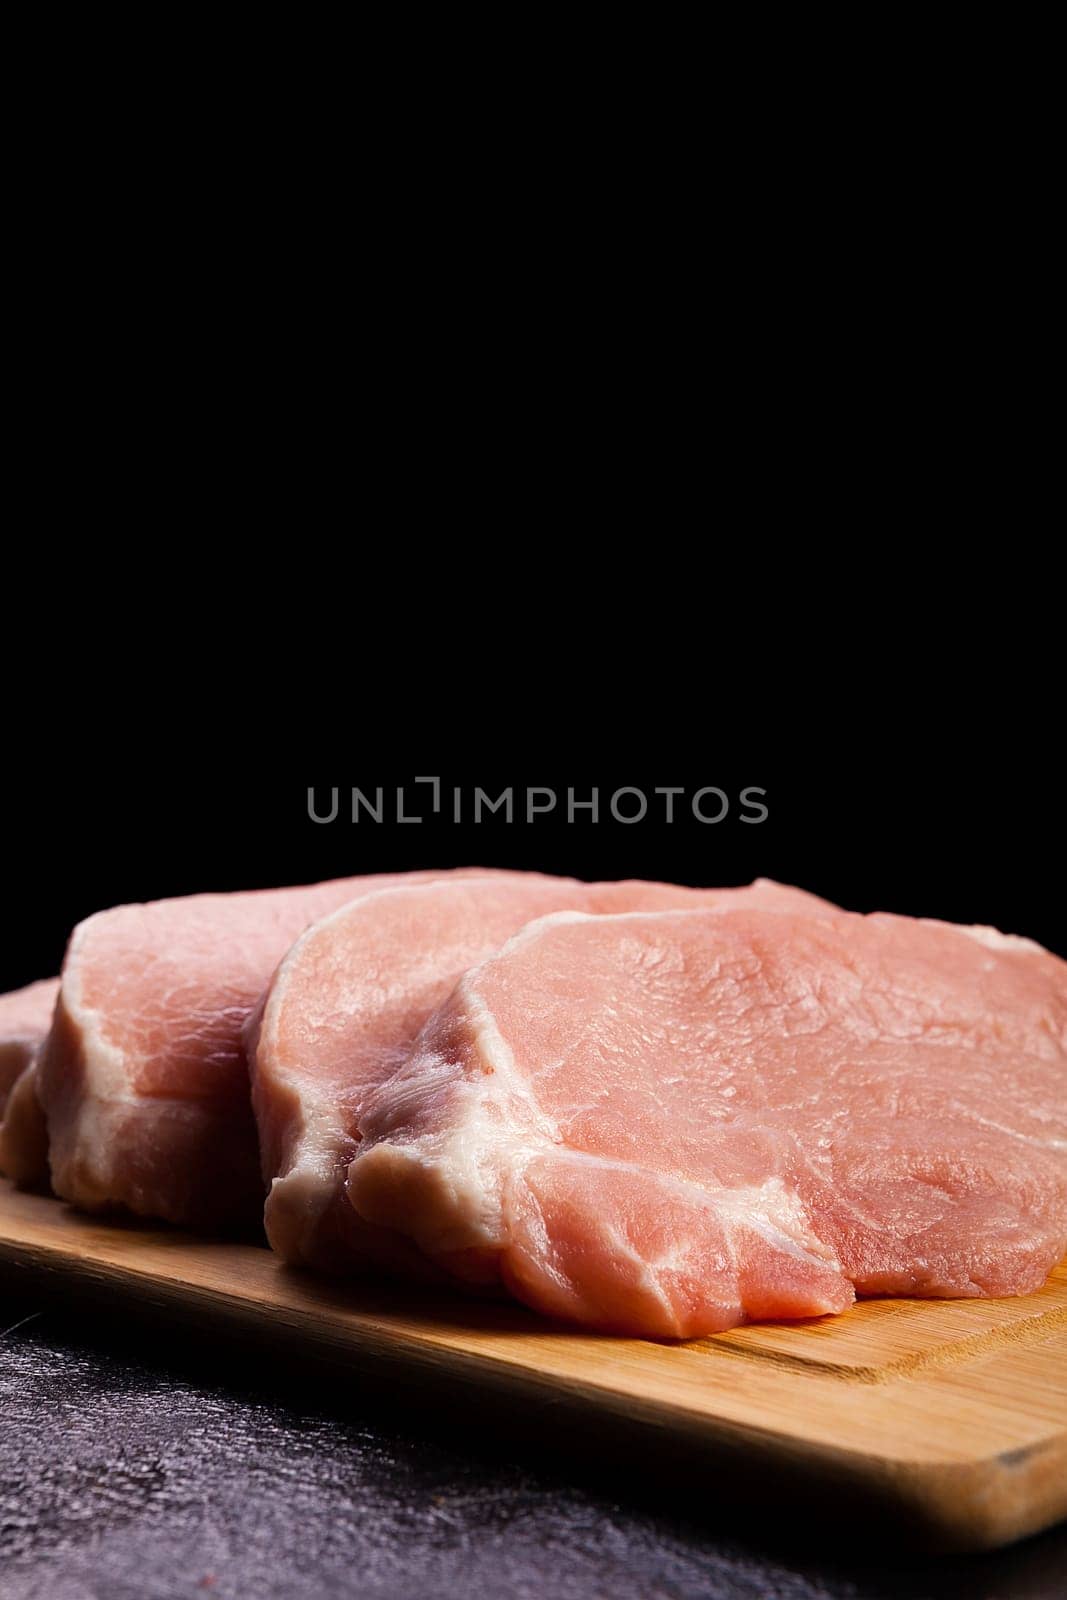 four pieces of fresh raw meat on wooden board on black wooden background. Gourmet food and fresh uncooked meal